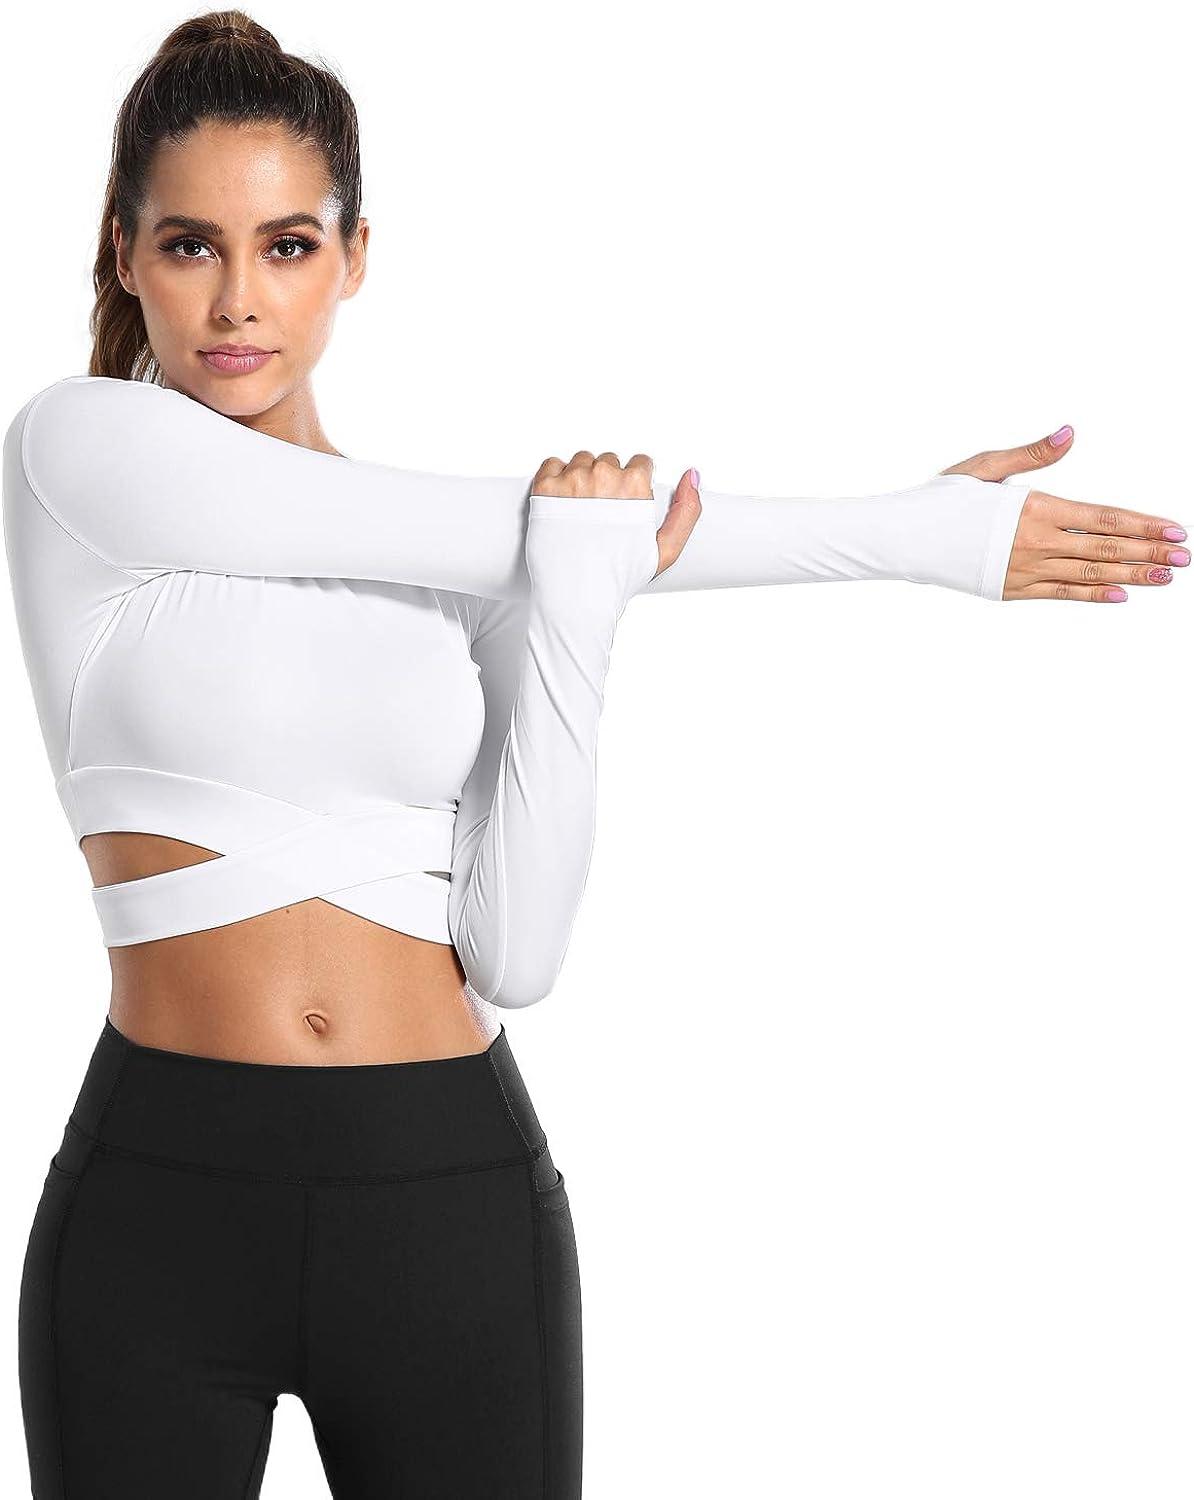  White Crop Tops For Women Cute Loose Fit Workout